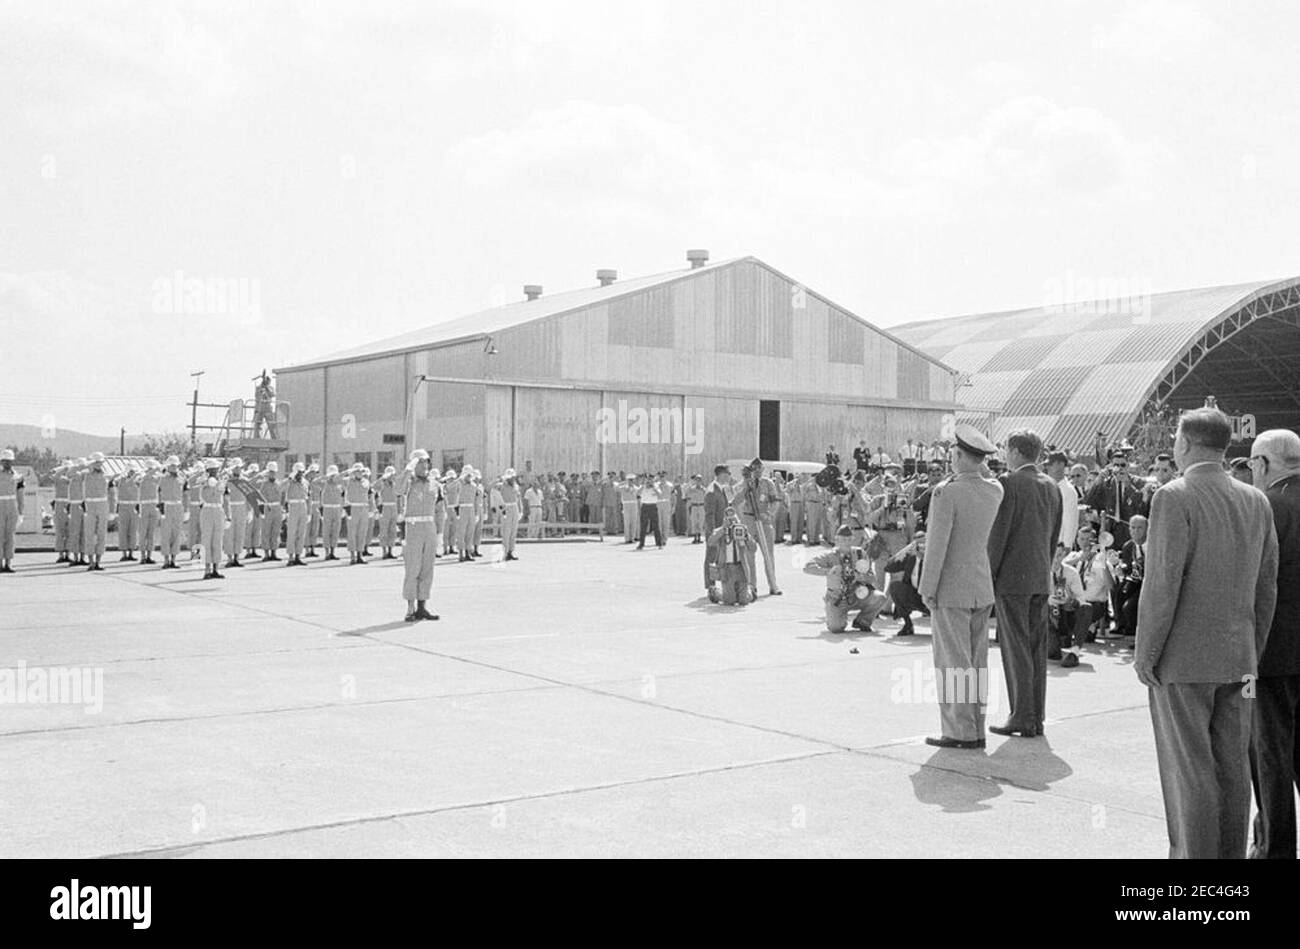 Inspection tour of NASA installations: Huntsville Alabama, Redstone Army Airfield and George C. Marshall Space Flight Center, 9:35AM. President John F. Kennedy (right, back to camera) receives military honors upon arrival at Redstone Army Airfield, Redstone Arsenal, Huntsville, Alabama; Commanding General of the U.S. Army Missile Command, Major General Francis J. McMorrow (saluting), stands left of President Kennedy. Standing at far right in foreground: Administrator of the National Aeronautics and Space Administration (NASA), Dr. James E. Webb; Senator Alexander Wiley of Wisconsin (partially Stock Photo